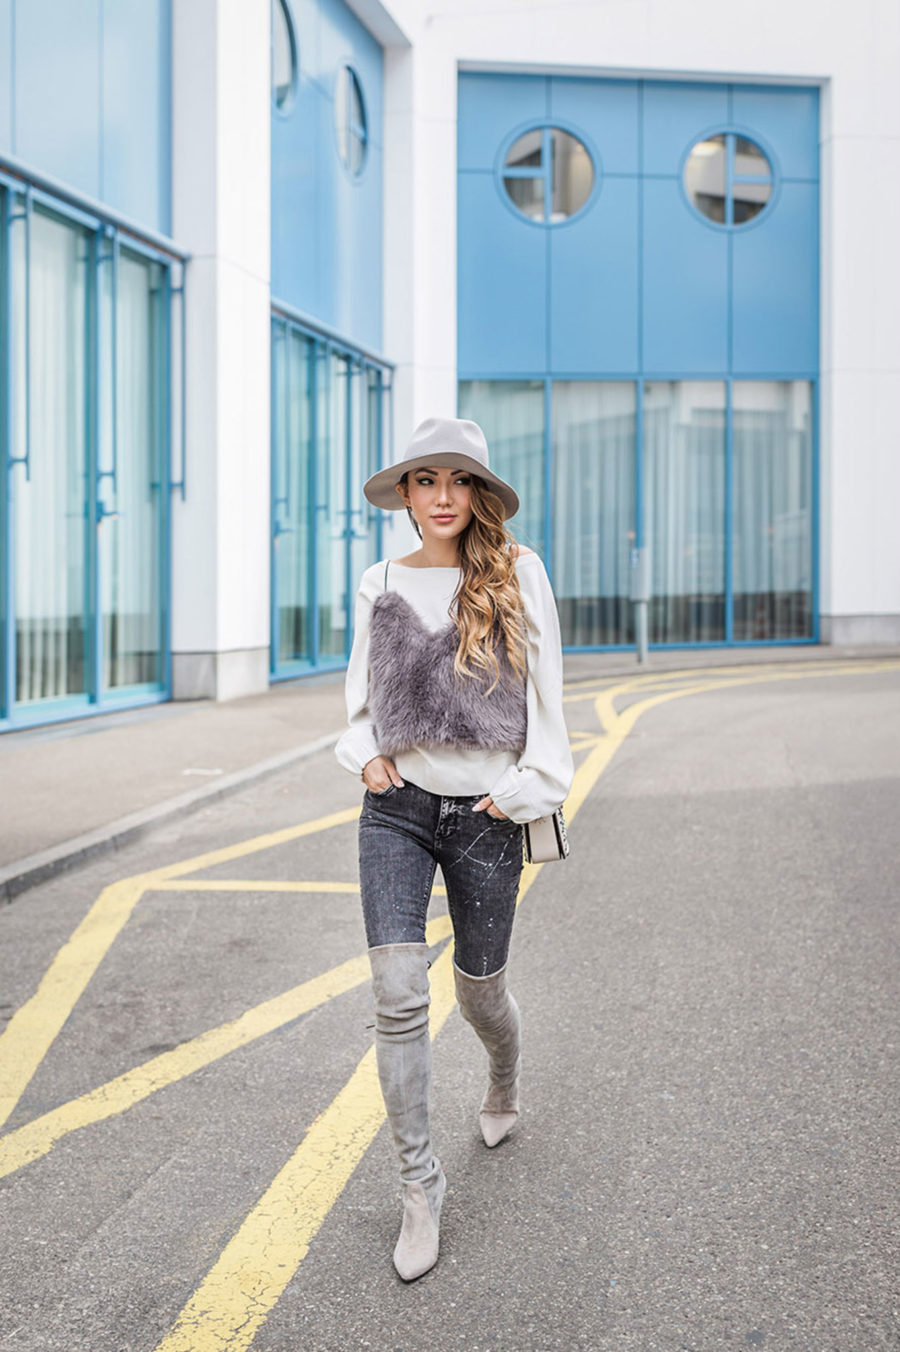 THIGHHIGH BOOTS - Tips for Styling Thigh High Boots - OTK Over the Knee Boots Winter Outfits, gray over the knee boots // NotJessFashion.com